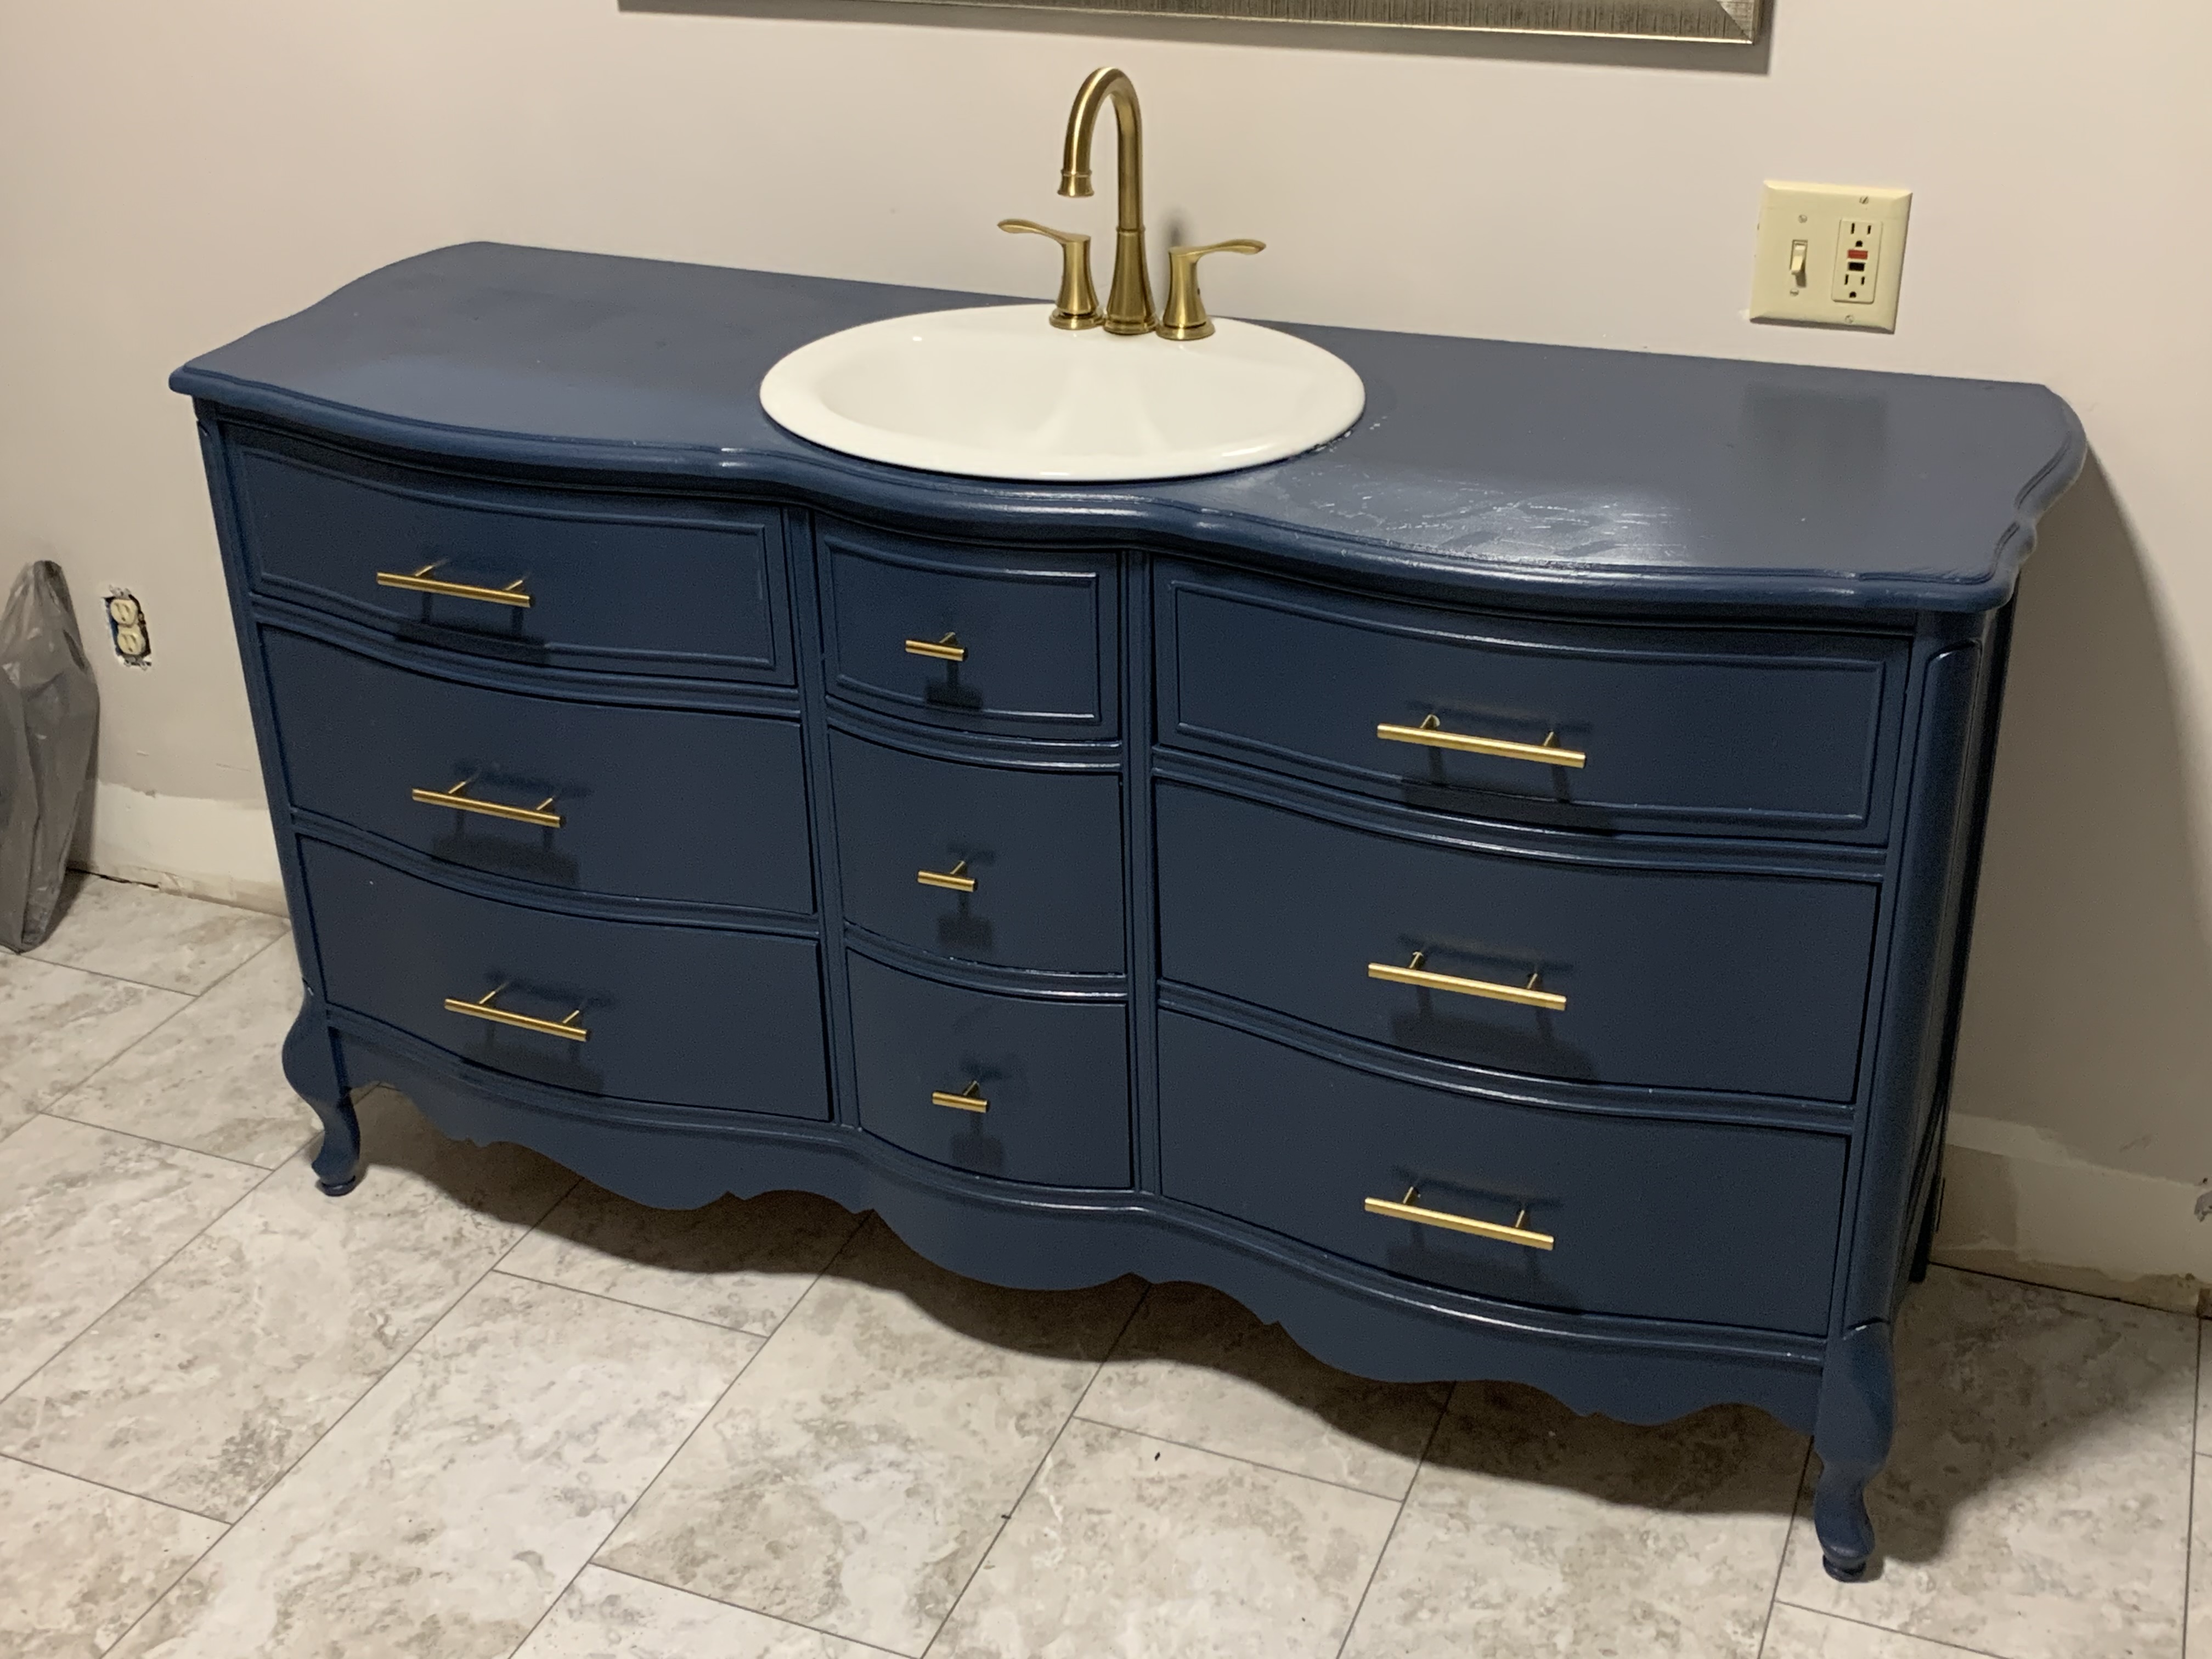 How to Make a Bathroom Vanity out of a Dresser